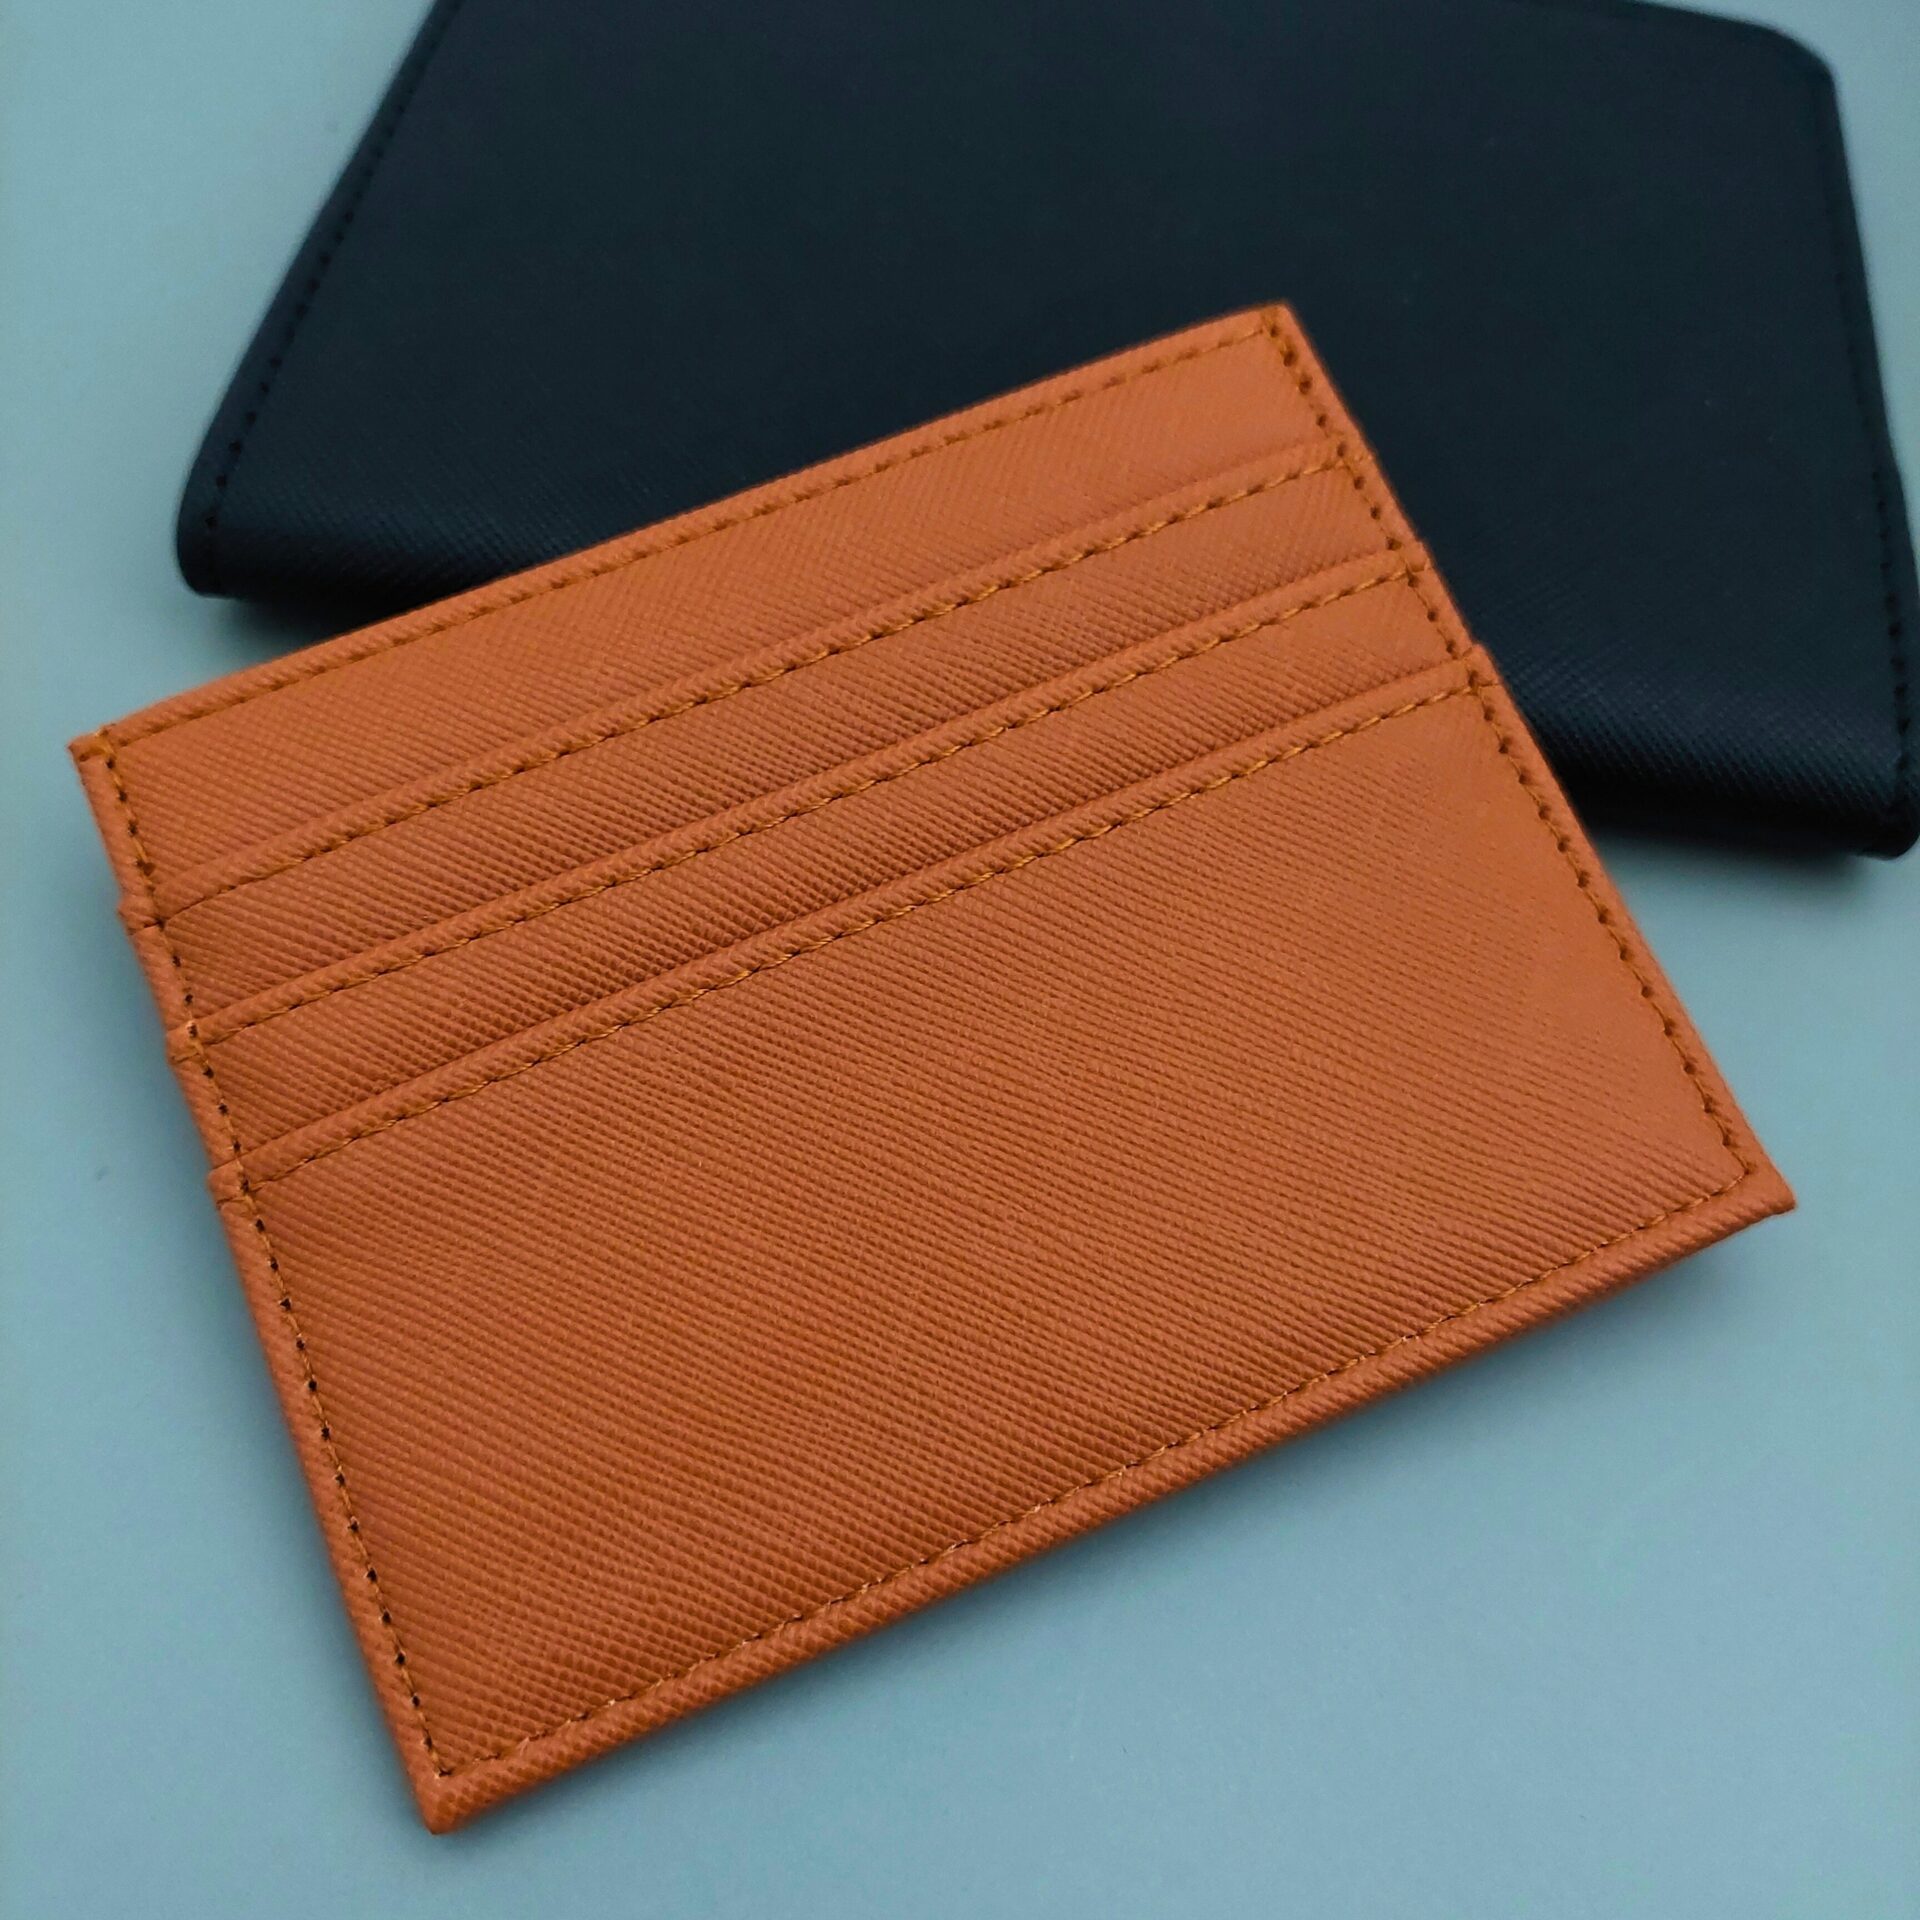 card holder corporate gift singapore leather karta travel accessories